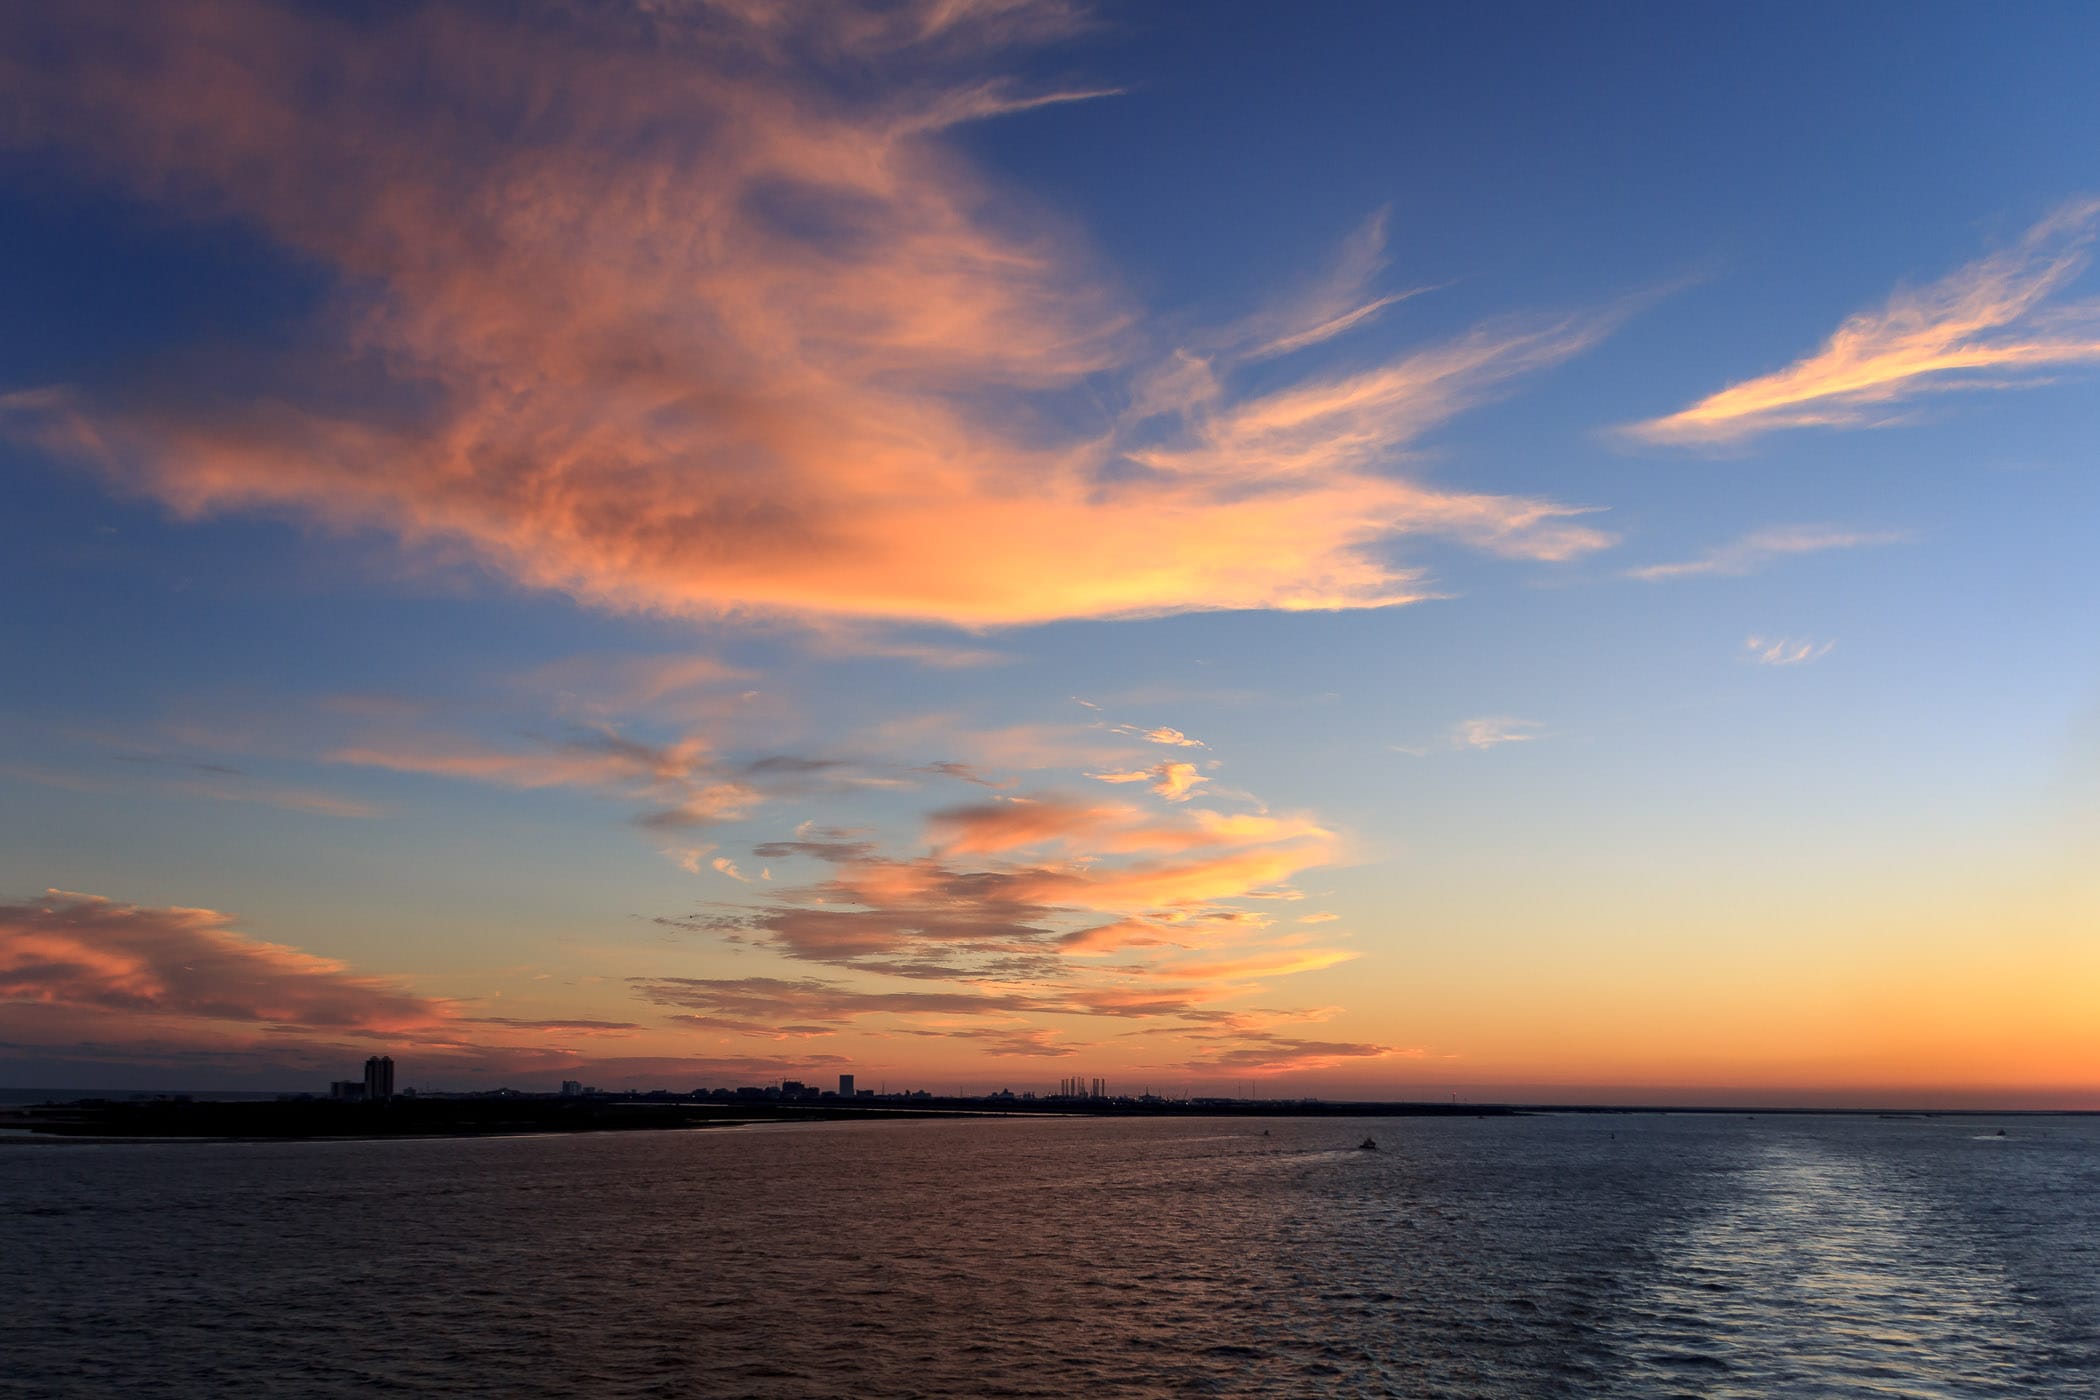 Clouds illuminated by the setting sun over Galveston Bay, Texas.